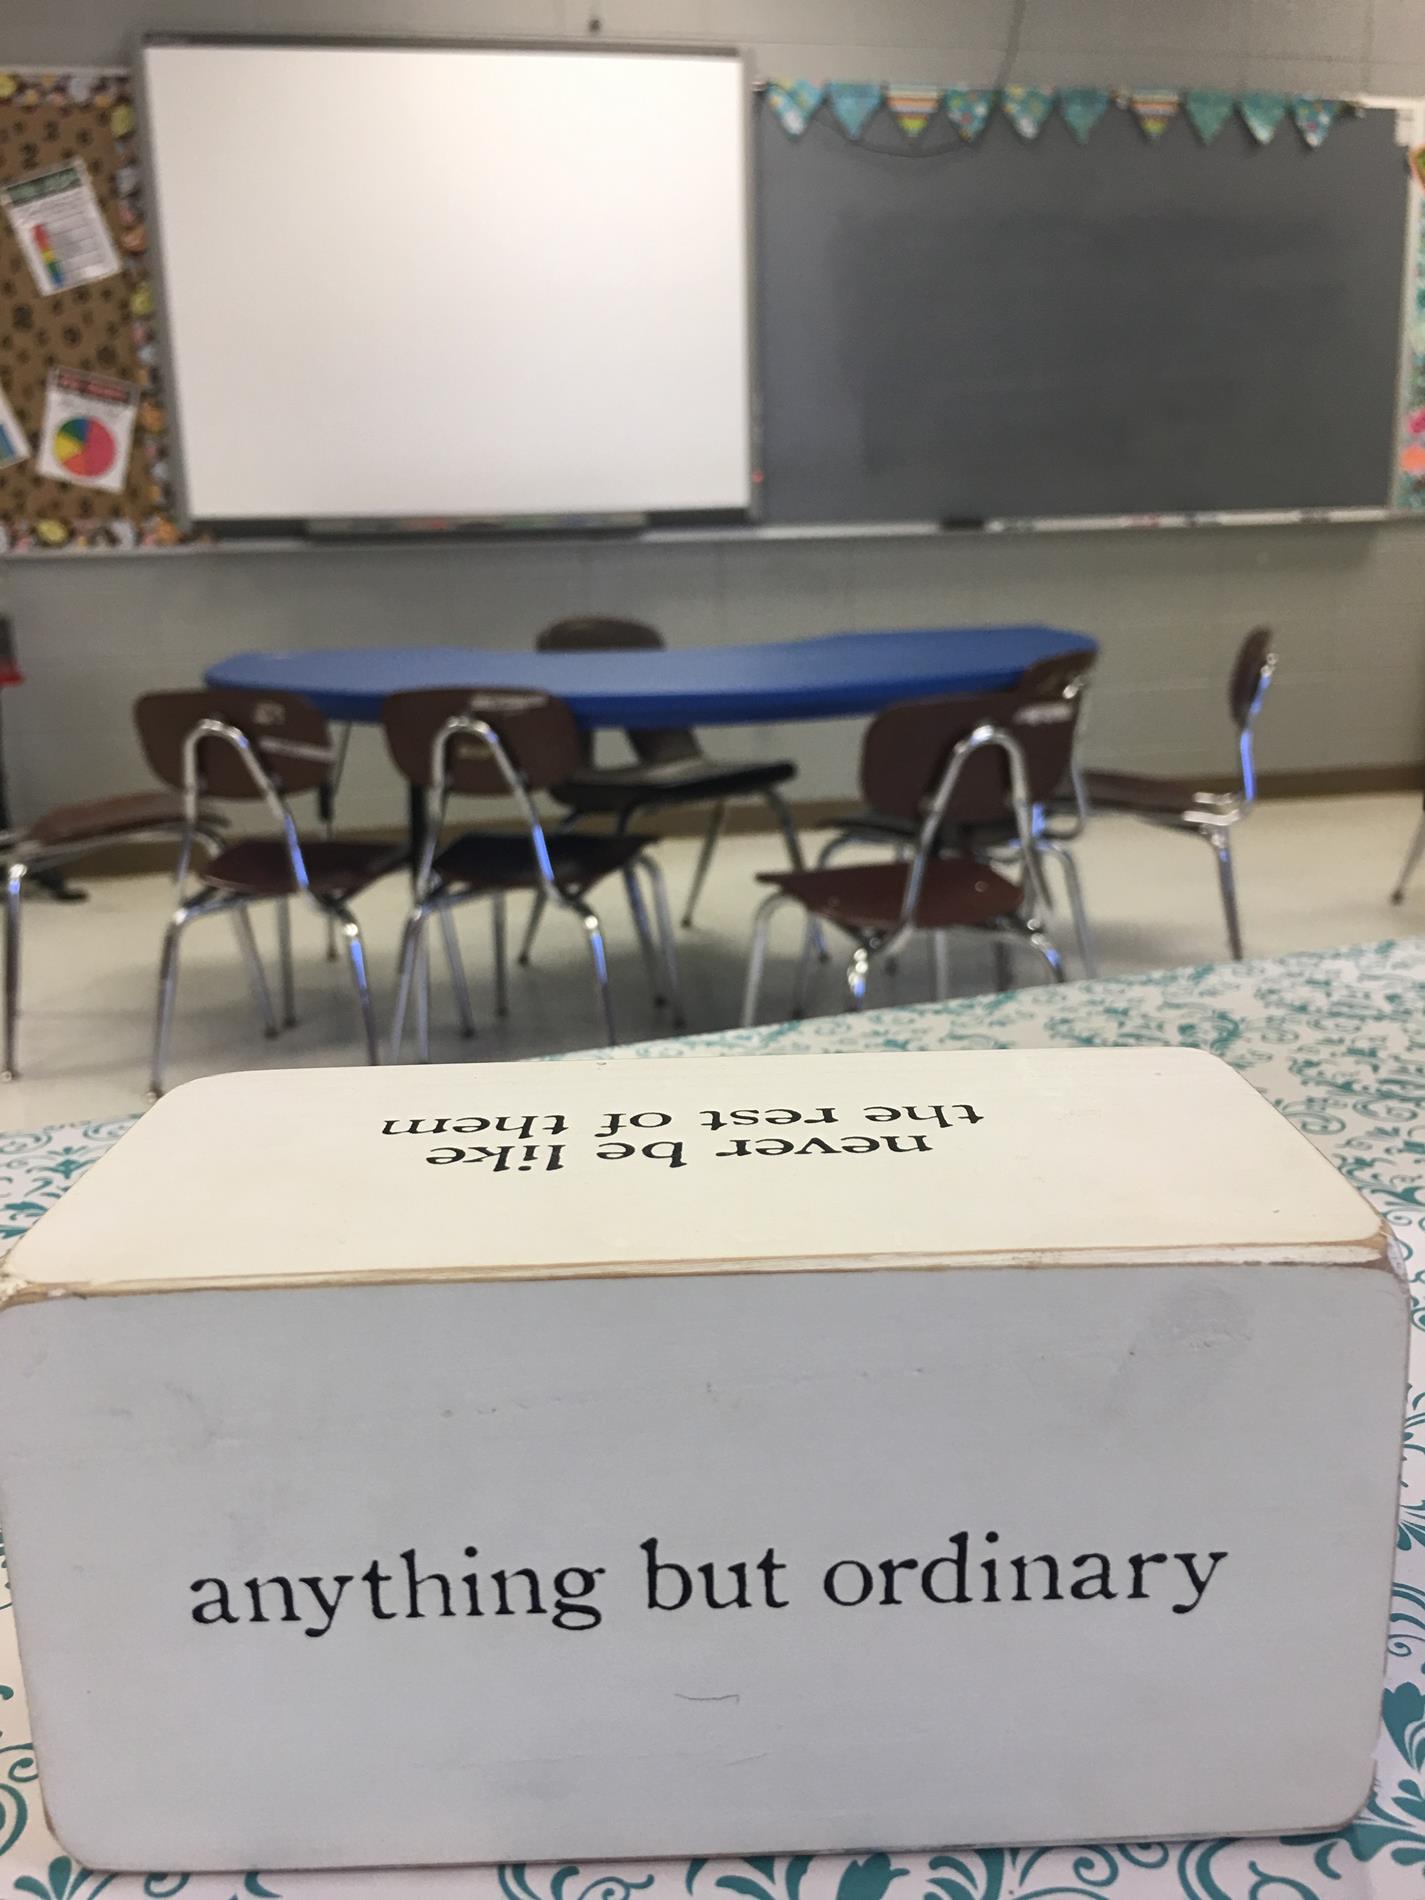 Picture of Mrs. Vick's room with the saying "Anything but ordinary" showing.